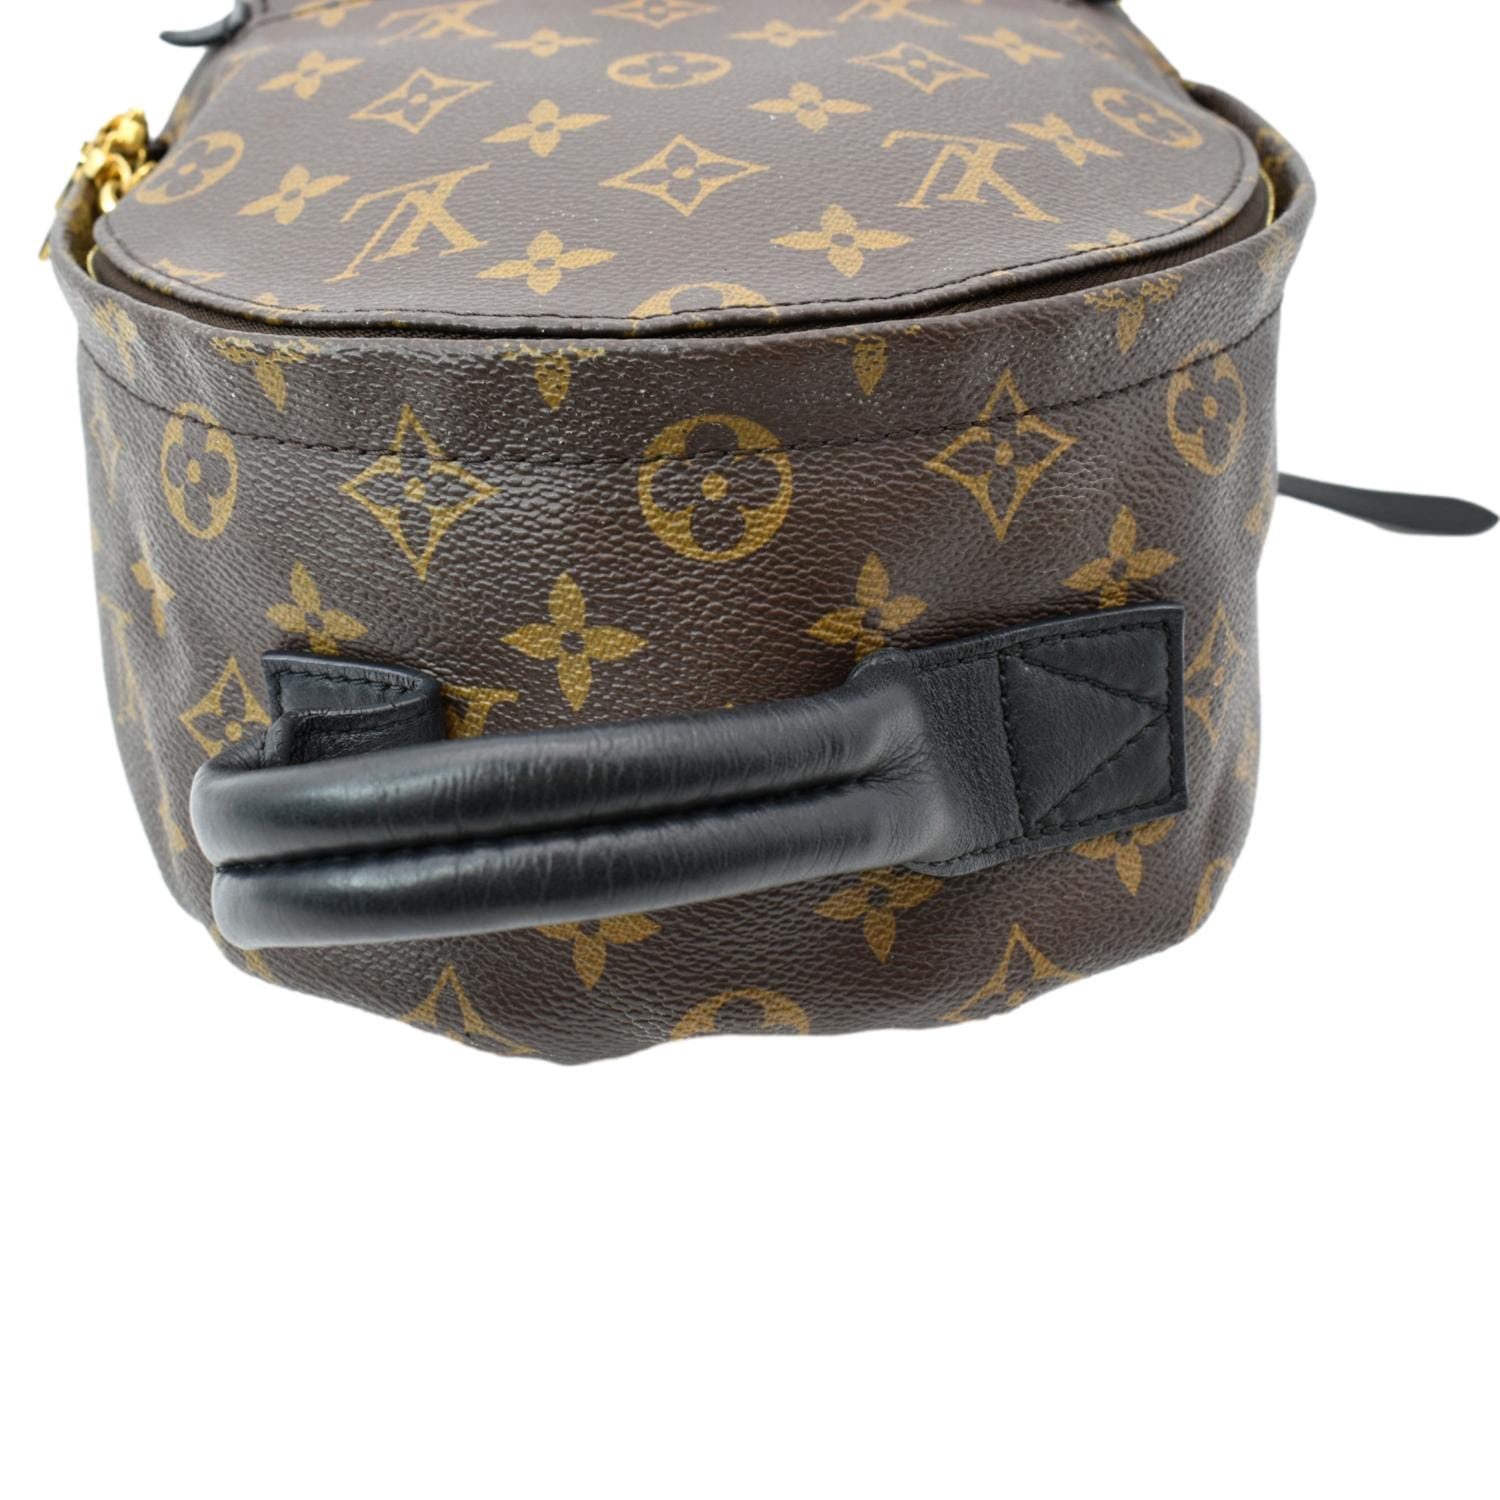 ❤️SOLD❤️Preowned Louis Vuitton Palm Springs Pm